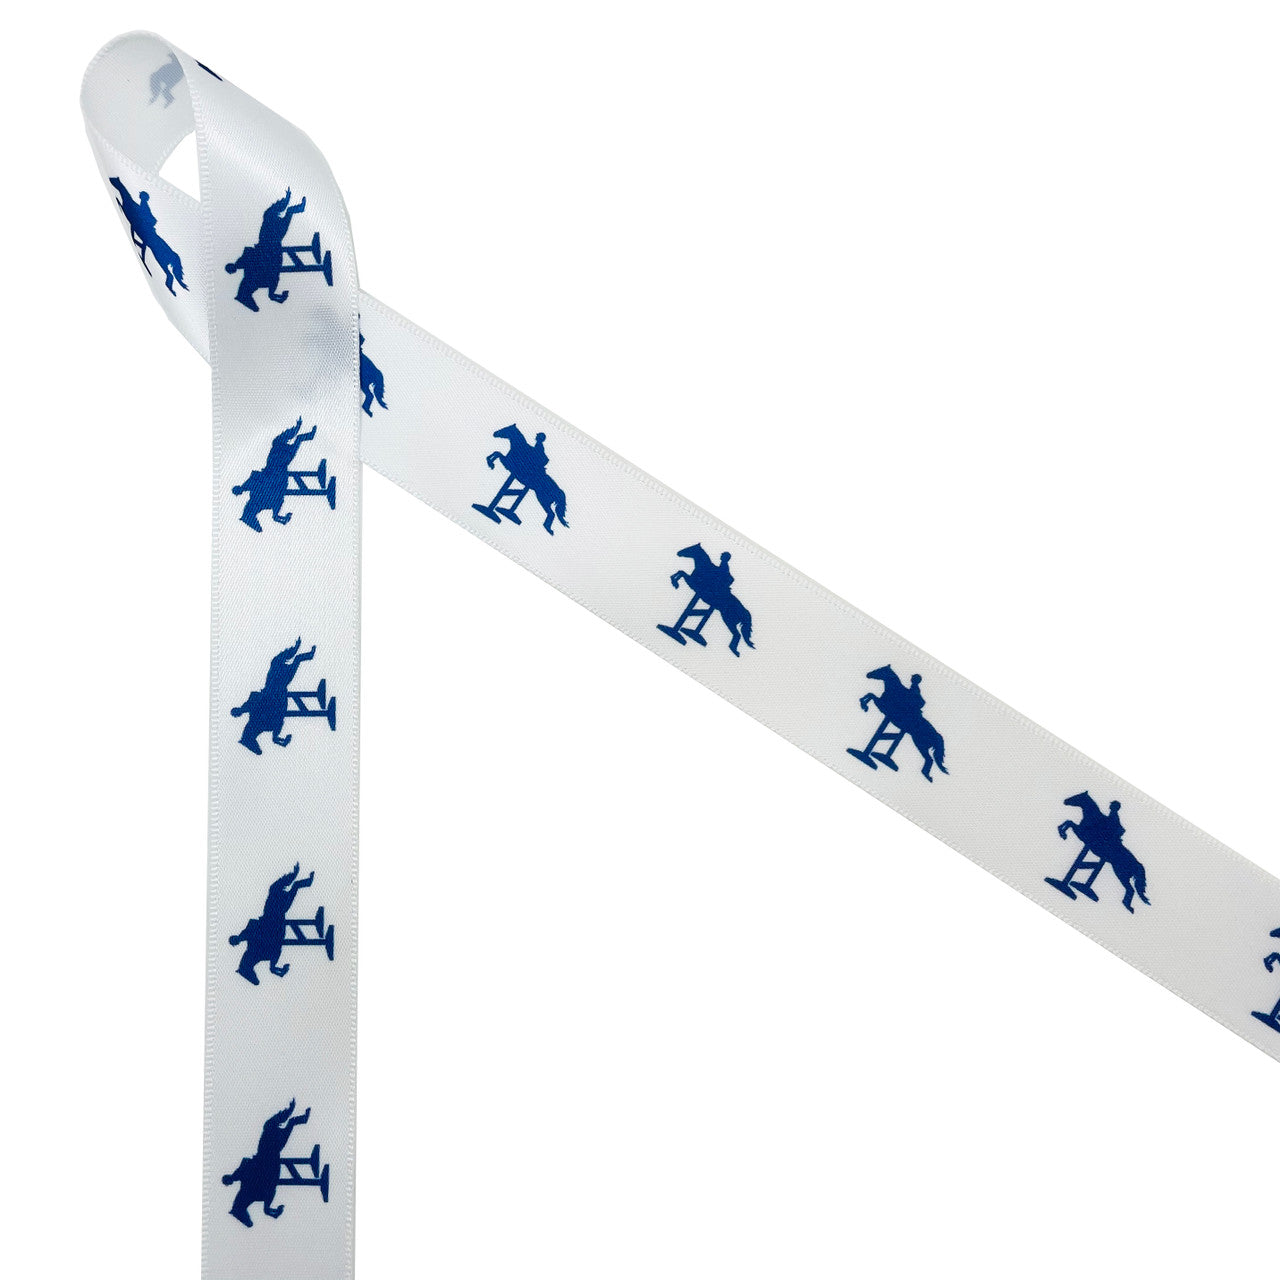 Horse jumping fences in navy blue printed on 7/8" white satin ribbon is ideal for the equestrian in your life. This classic design is perfect for pony finals ribbons, hair bows, horse shows, head bands, party decor, floral design and craft projects. Be sure to have this ribbon on hand for quilting and sewing projects too! All our ribbon is designed and printed in the USA